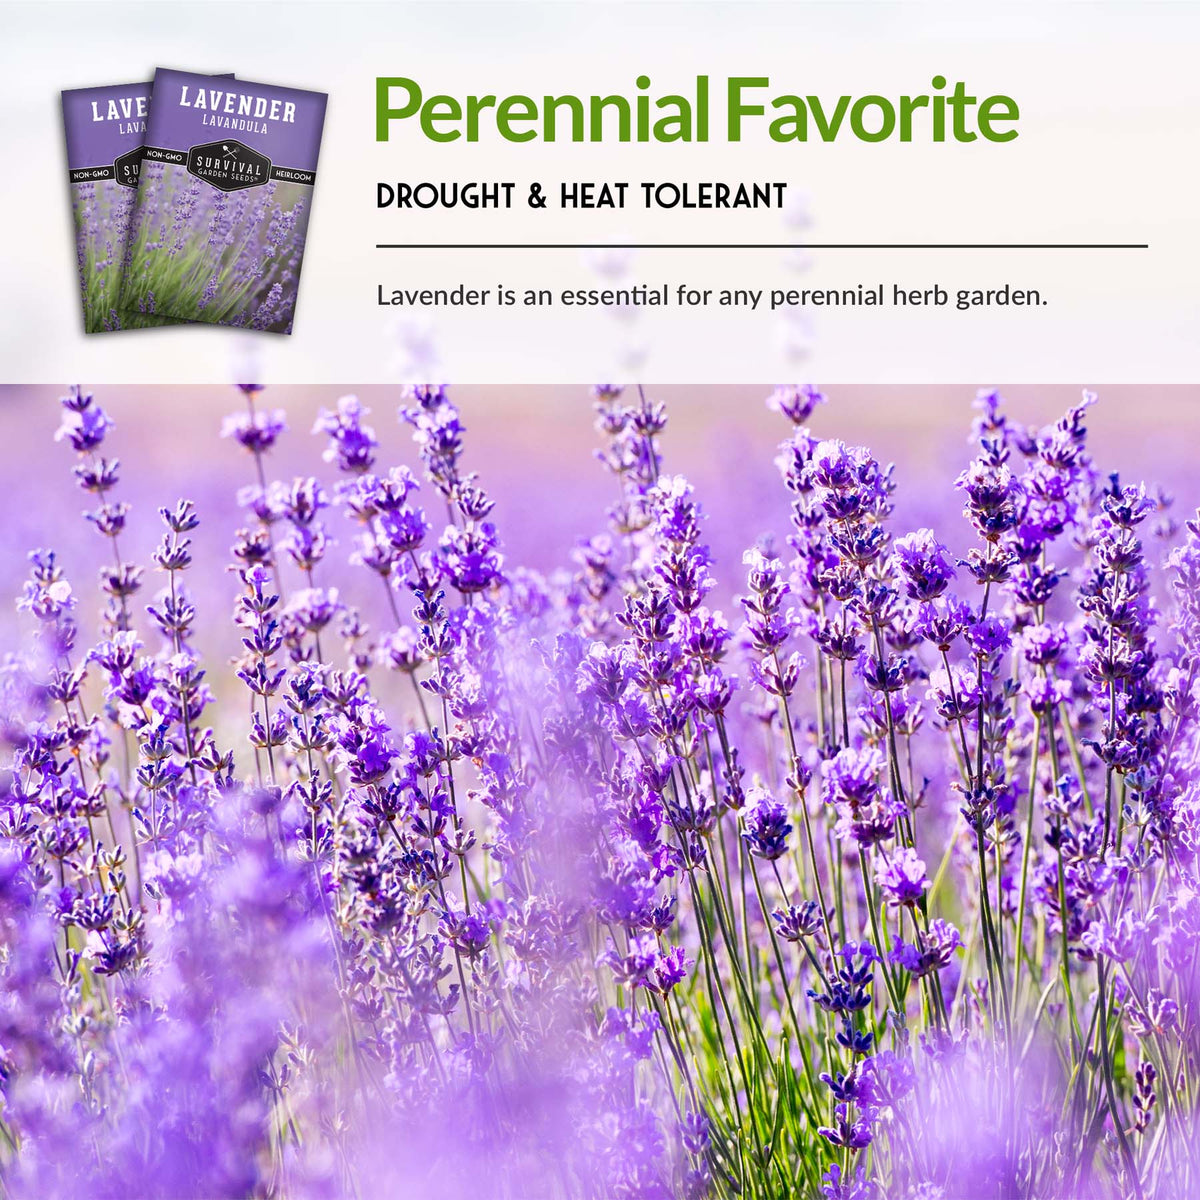 Lavender is a drought and heat tolerant perennial